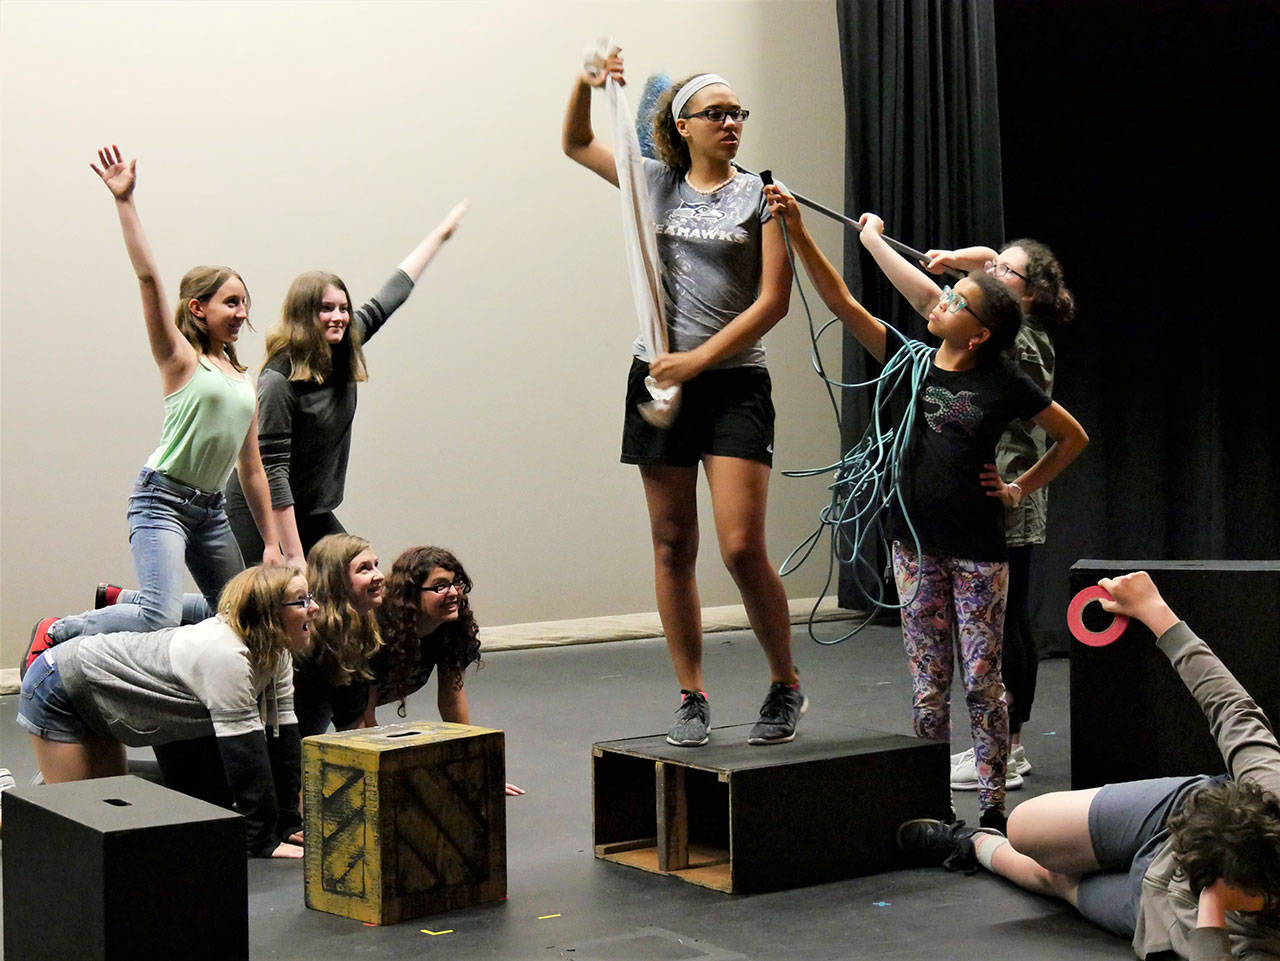 Olympic Theatre Arts hosts Musical Theatre Intensive for Teens this summer. Here, participants in last year’s program work on dynamics of a scene. Photo courtesy of Olympic Theatre Arts